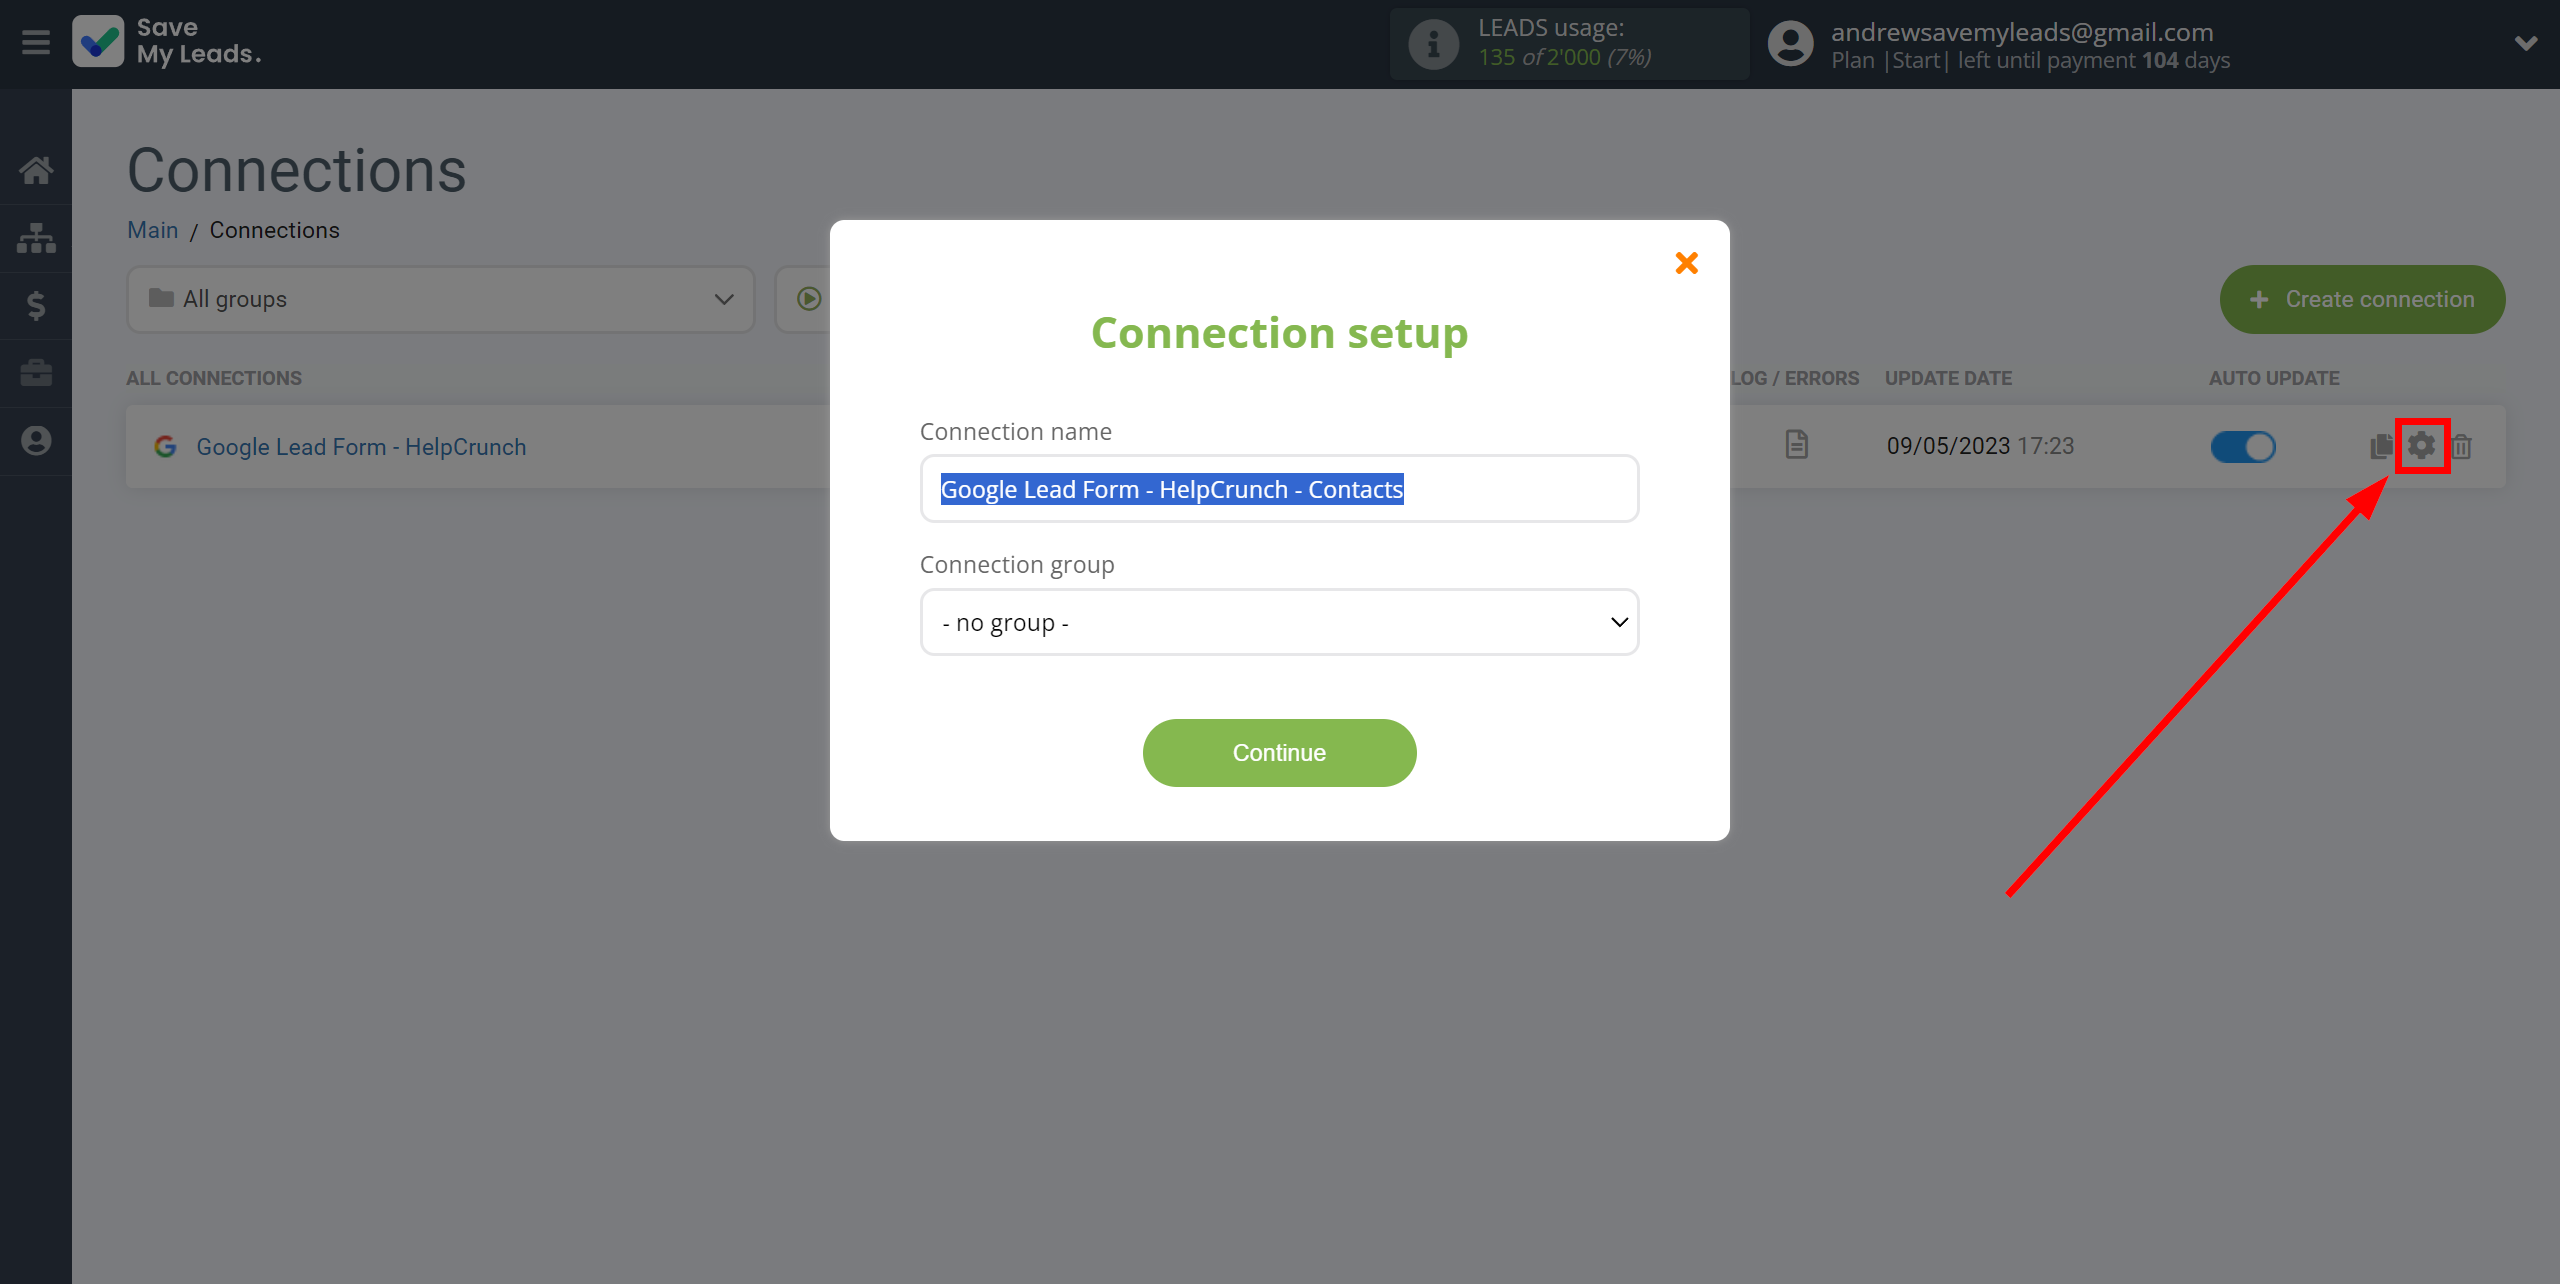 How to Connect Google Lead Form with HelpCrunch Create Contacts | Name and group connection